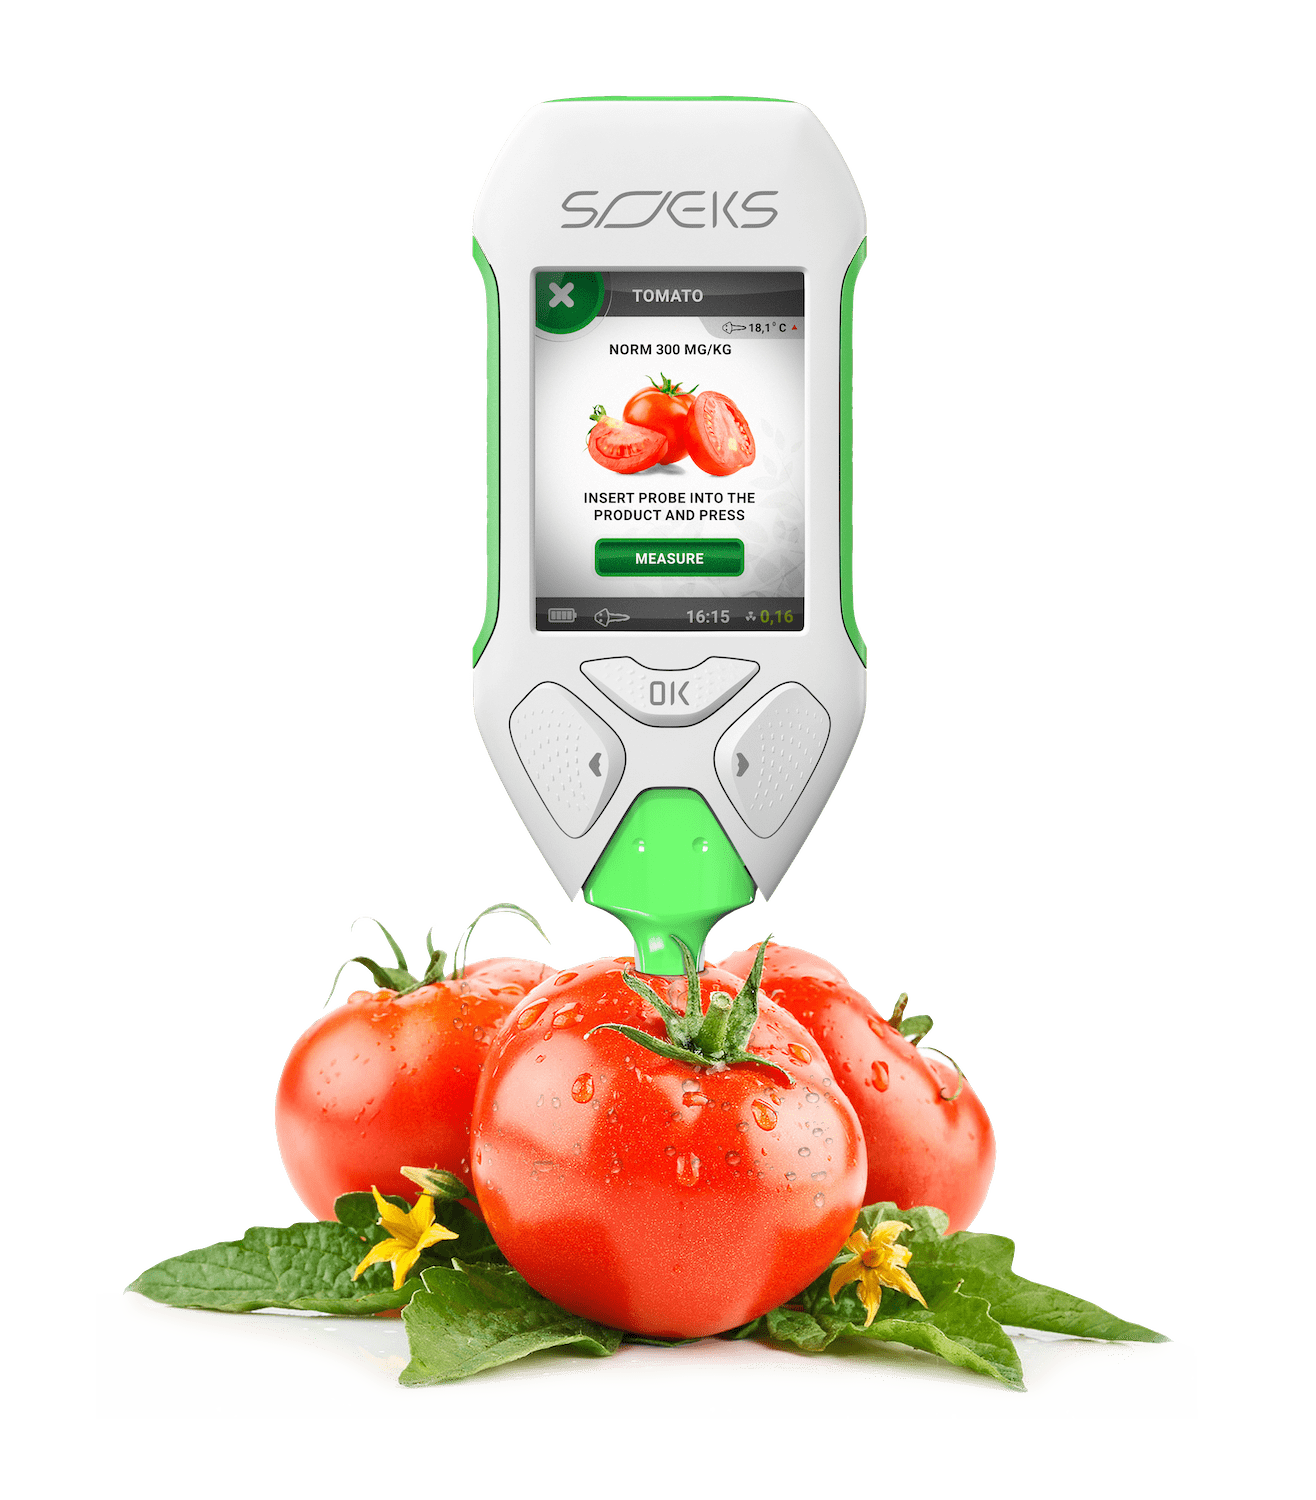 SOEKS EcoVisor F2 measures the nitrate content in the food you consume